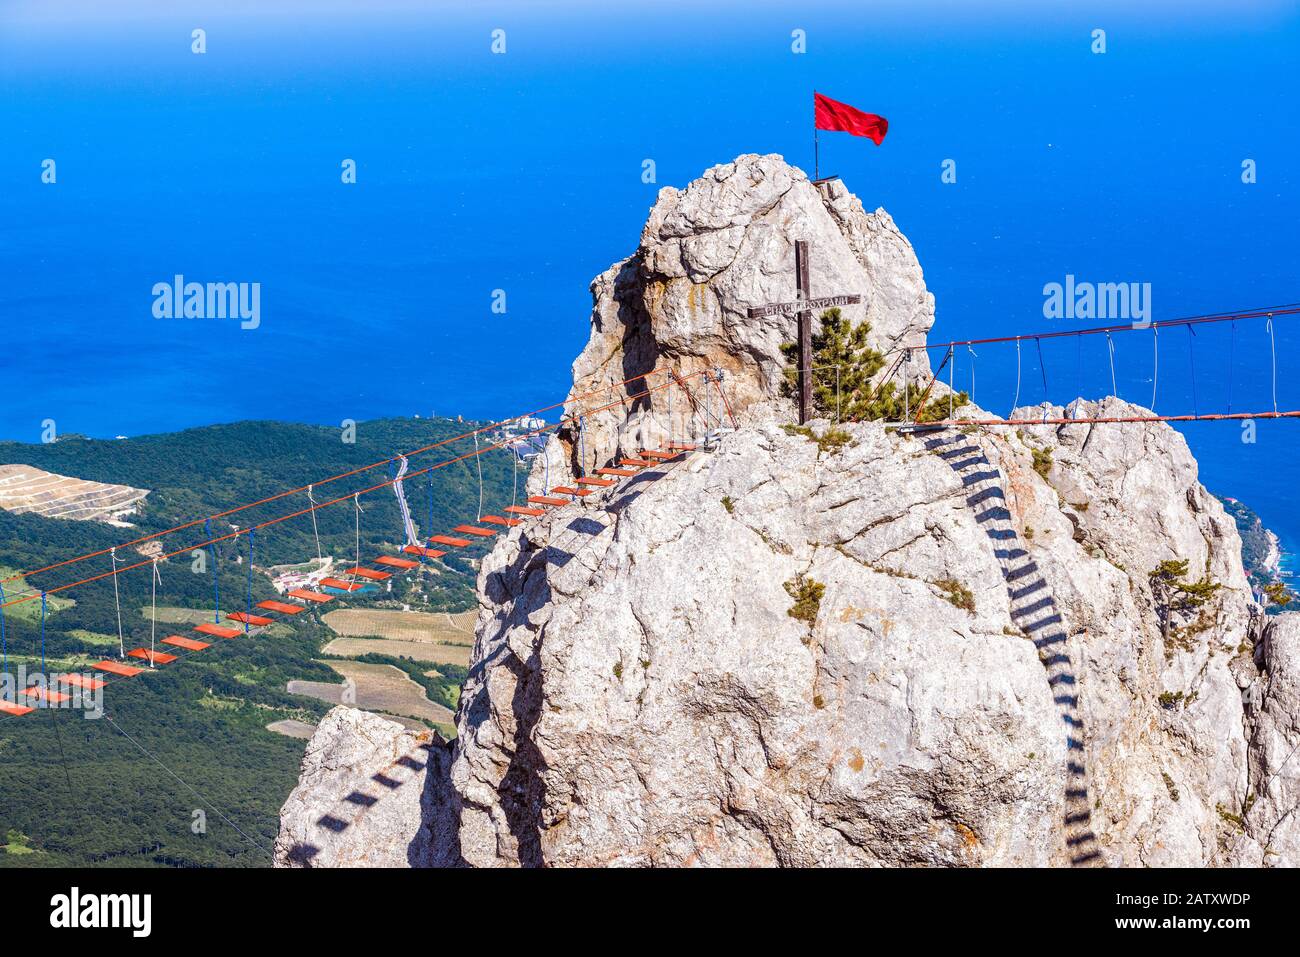 Rock on the Mount Ai-Petri with a rope bridge, Crimea, Russia. It is one of the natural landmarks in Crimea. 'Save and Protect' on a cross. Panorama o Stock Photo